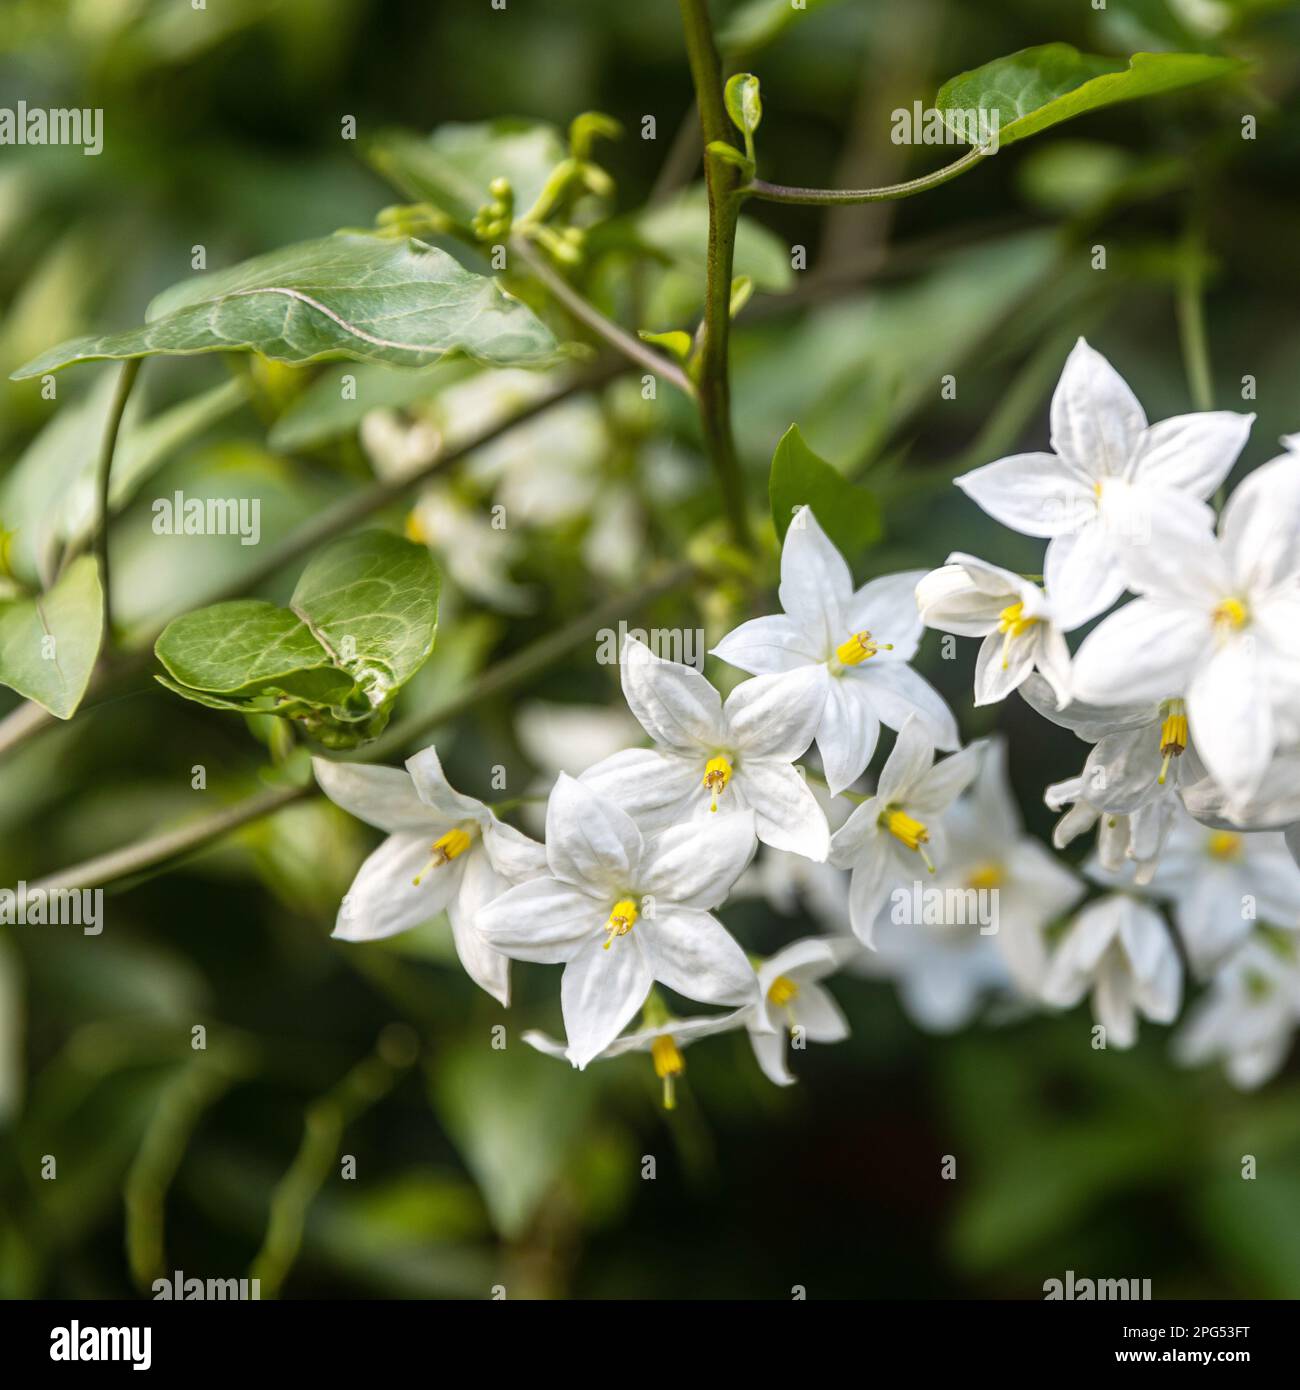 Square frame. Solanum laxum, commonly known as potato vine, potato climber or jasmine nightshade, is an evergreen vine in the family Solanaceae. Stock Photo